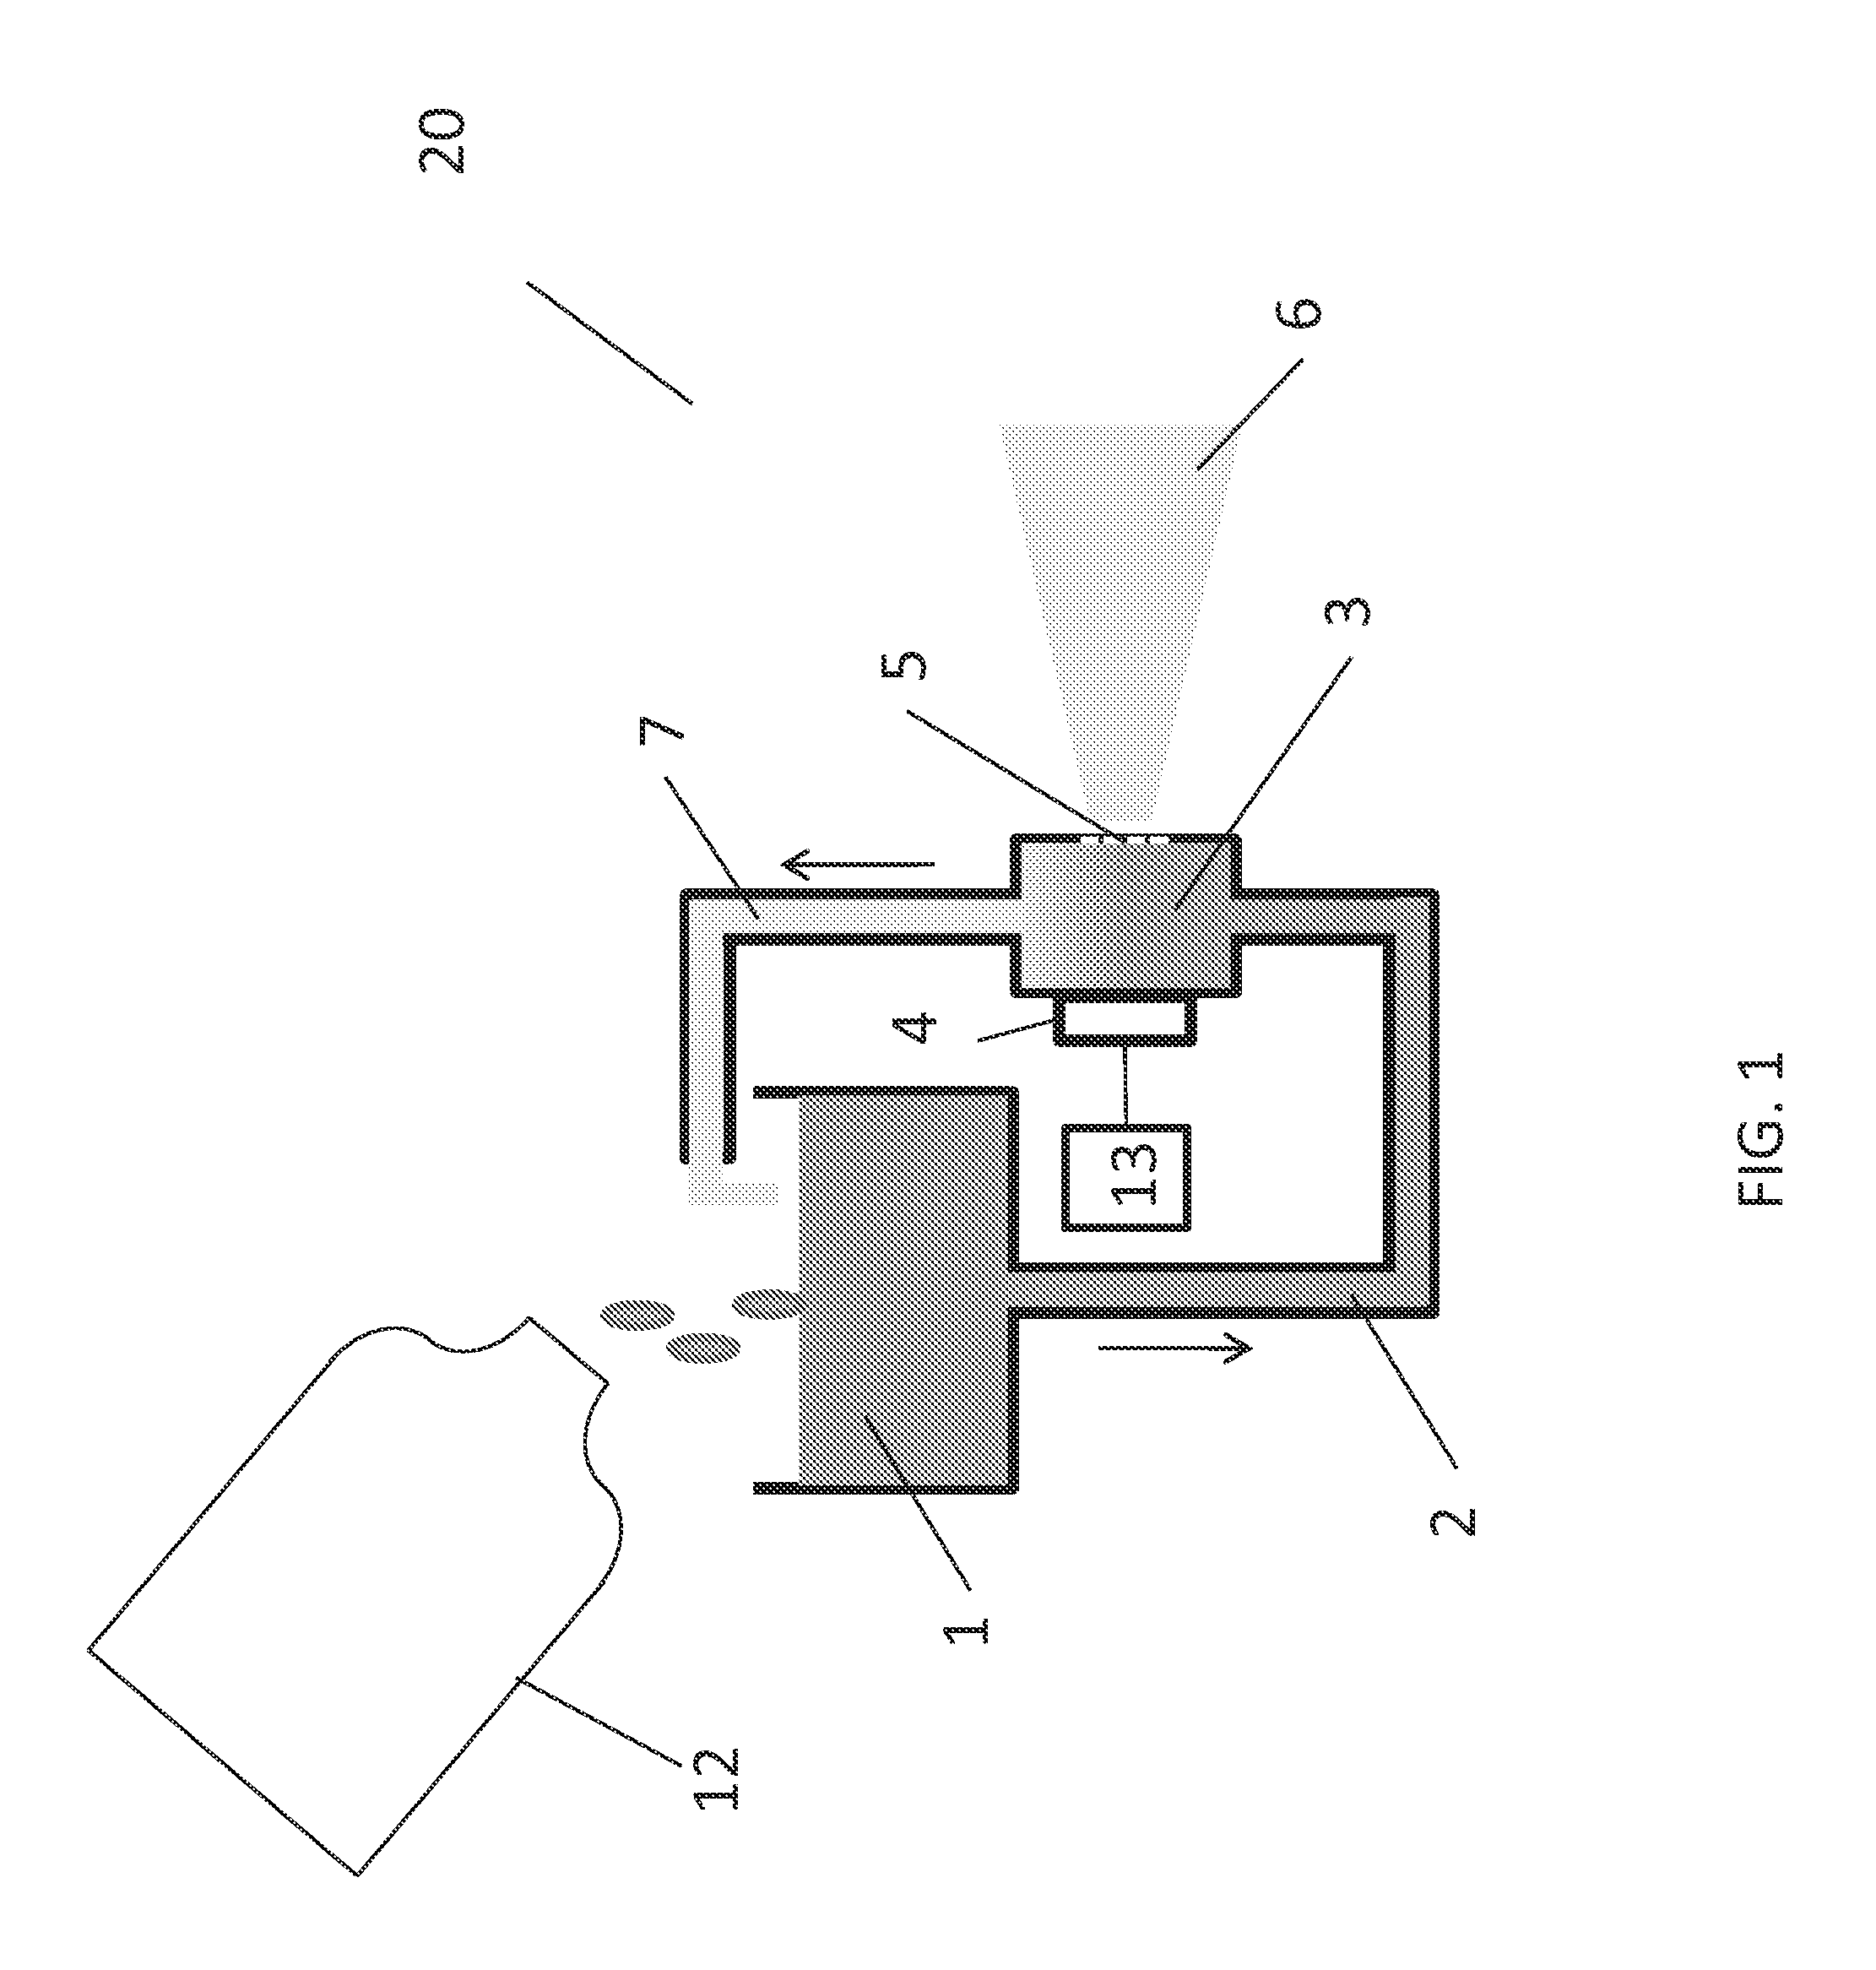 Aerosol generating device for nebulizing a liquid and a method of temperature control of a liquid to be nebulized